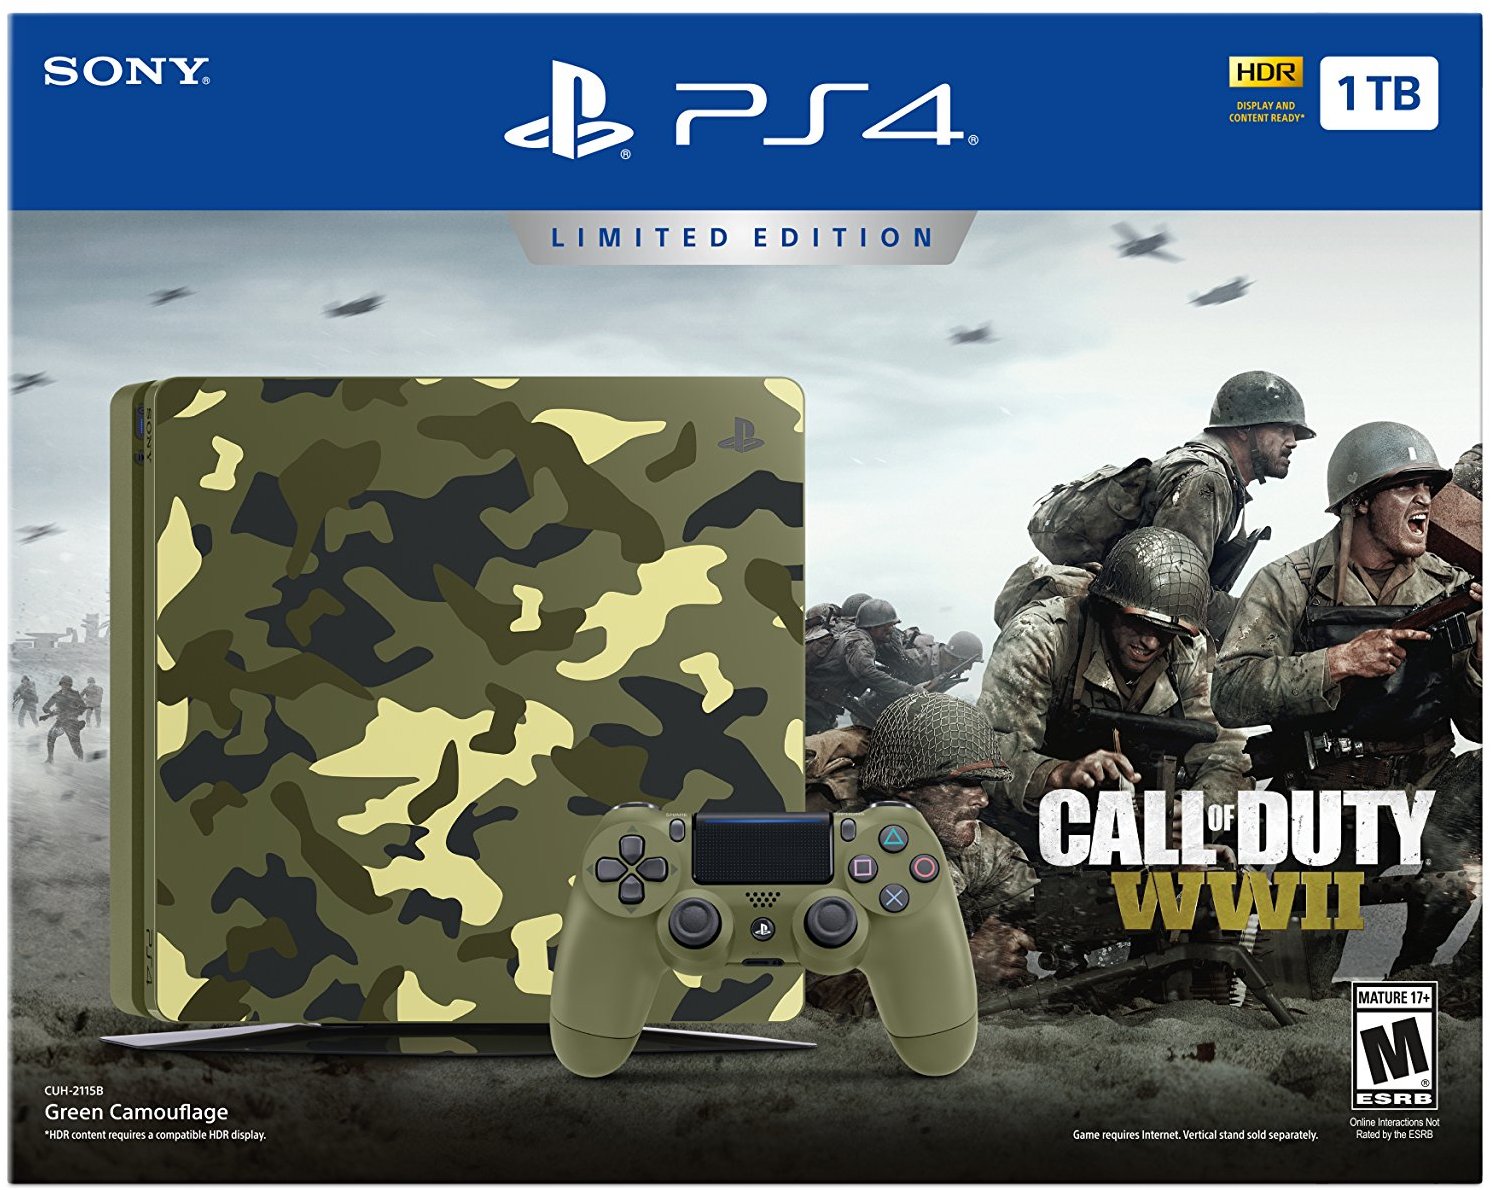 Sony PlayStation 4 1TB Call of Duty WWII Limited Edition Bundle, 3002200 - image 5 of 5